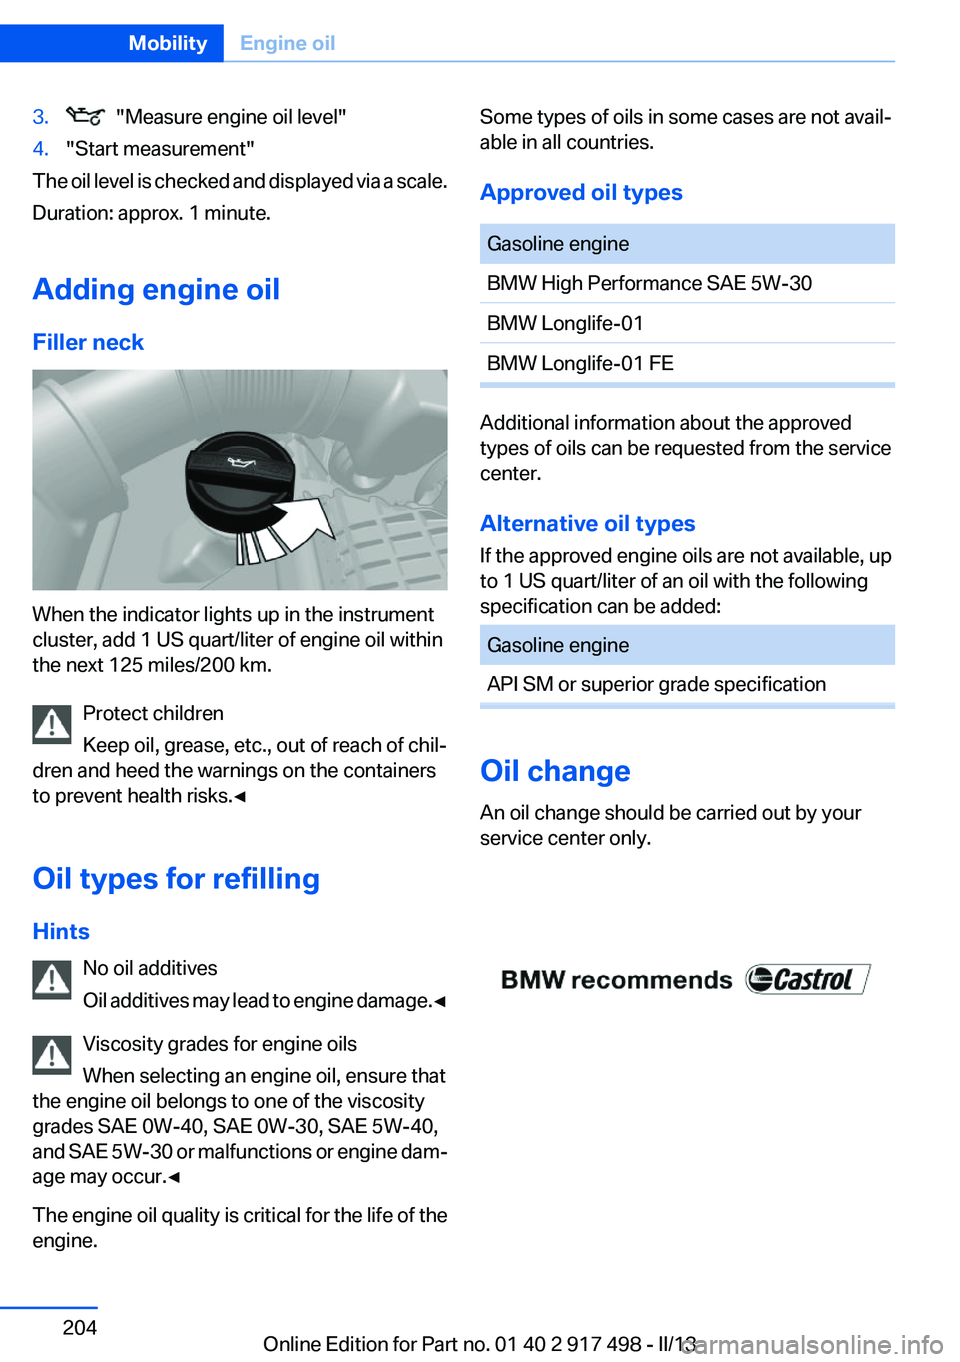 BMW 535I GRAN TURISMO 2013  Owners Manual 3.  "Measure engine oil level"4."Start measurement"
The oil level is checked and displayed via a scale.
Duration: approx. 1 minute.
Adding engine oil
Filler neck
When the indicator lig